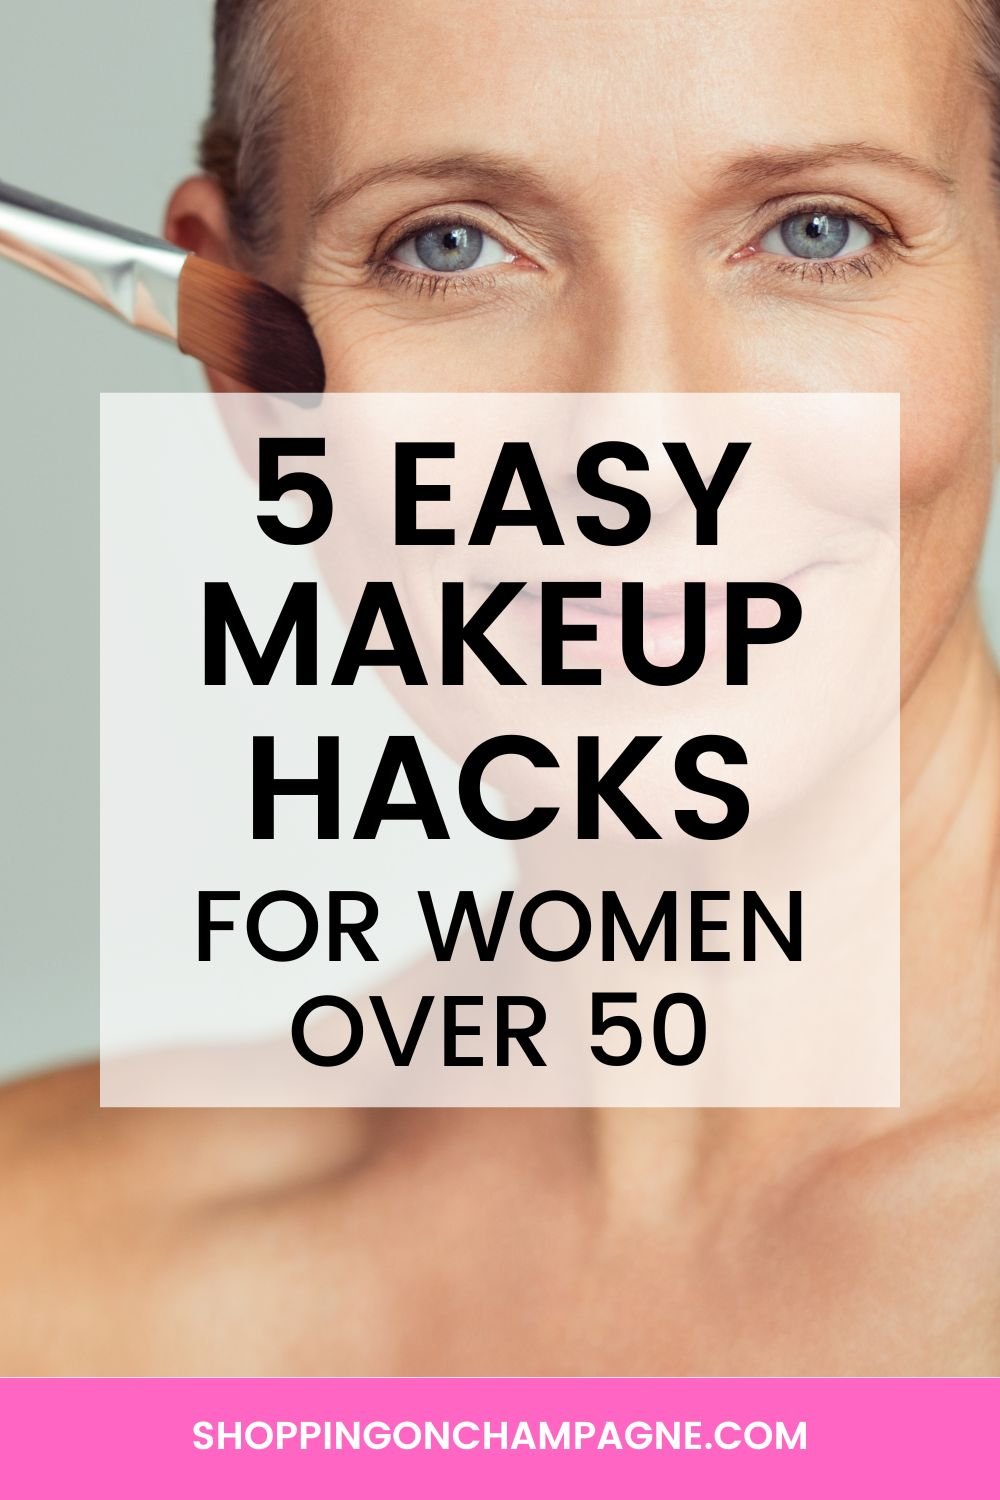 5 Easy Makeup Hacks for Women Over 50 — Shopping on Champagne, Nancy Queen